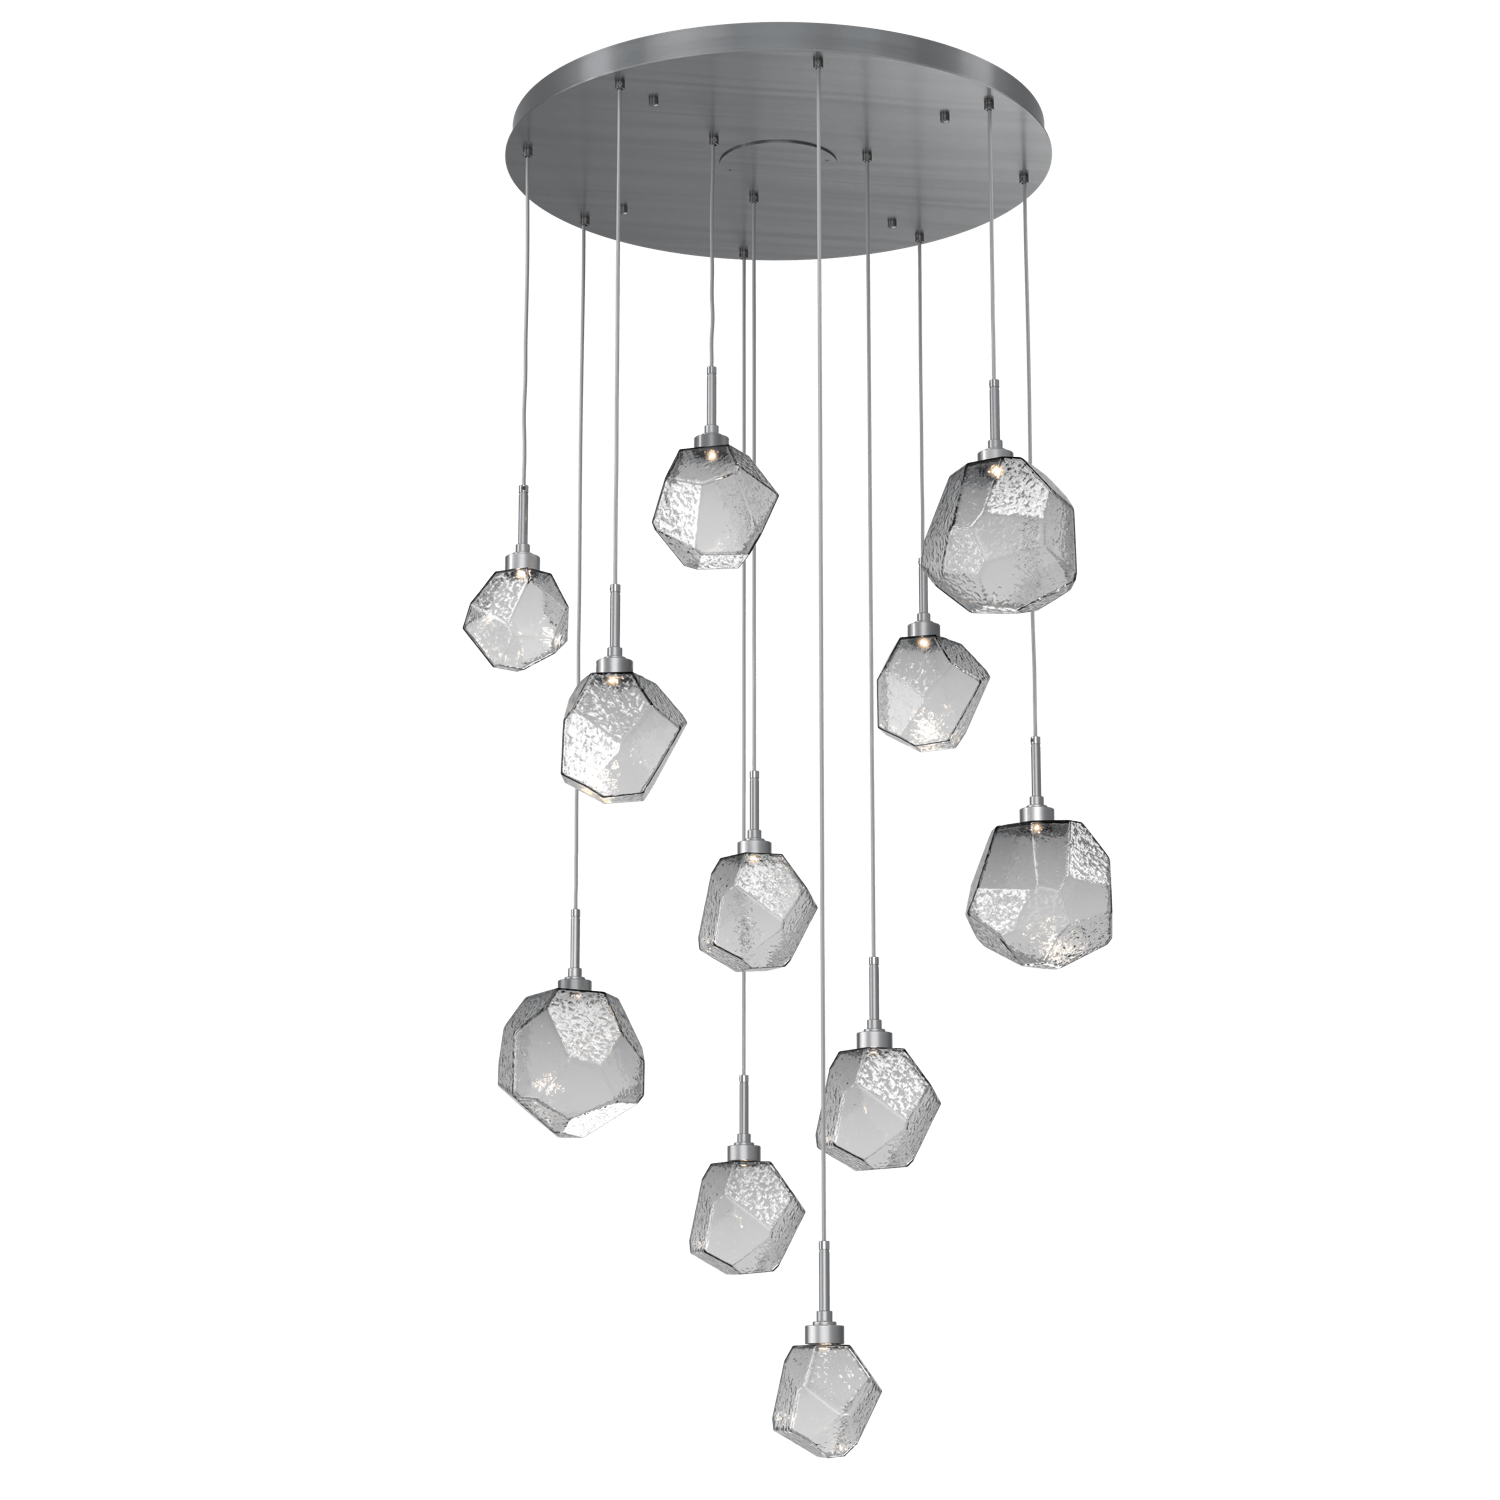 CHB0039-11-GM-S-Hammerton-Studio-Gem-11-light-round-pendant-chandelier-with-gunmetal-finish-and-smoke-blown-glass-shades-and-LED-lamping